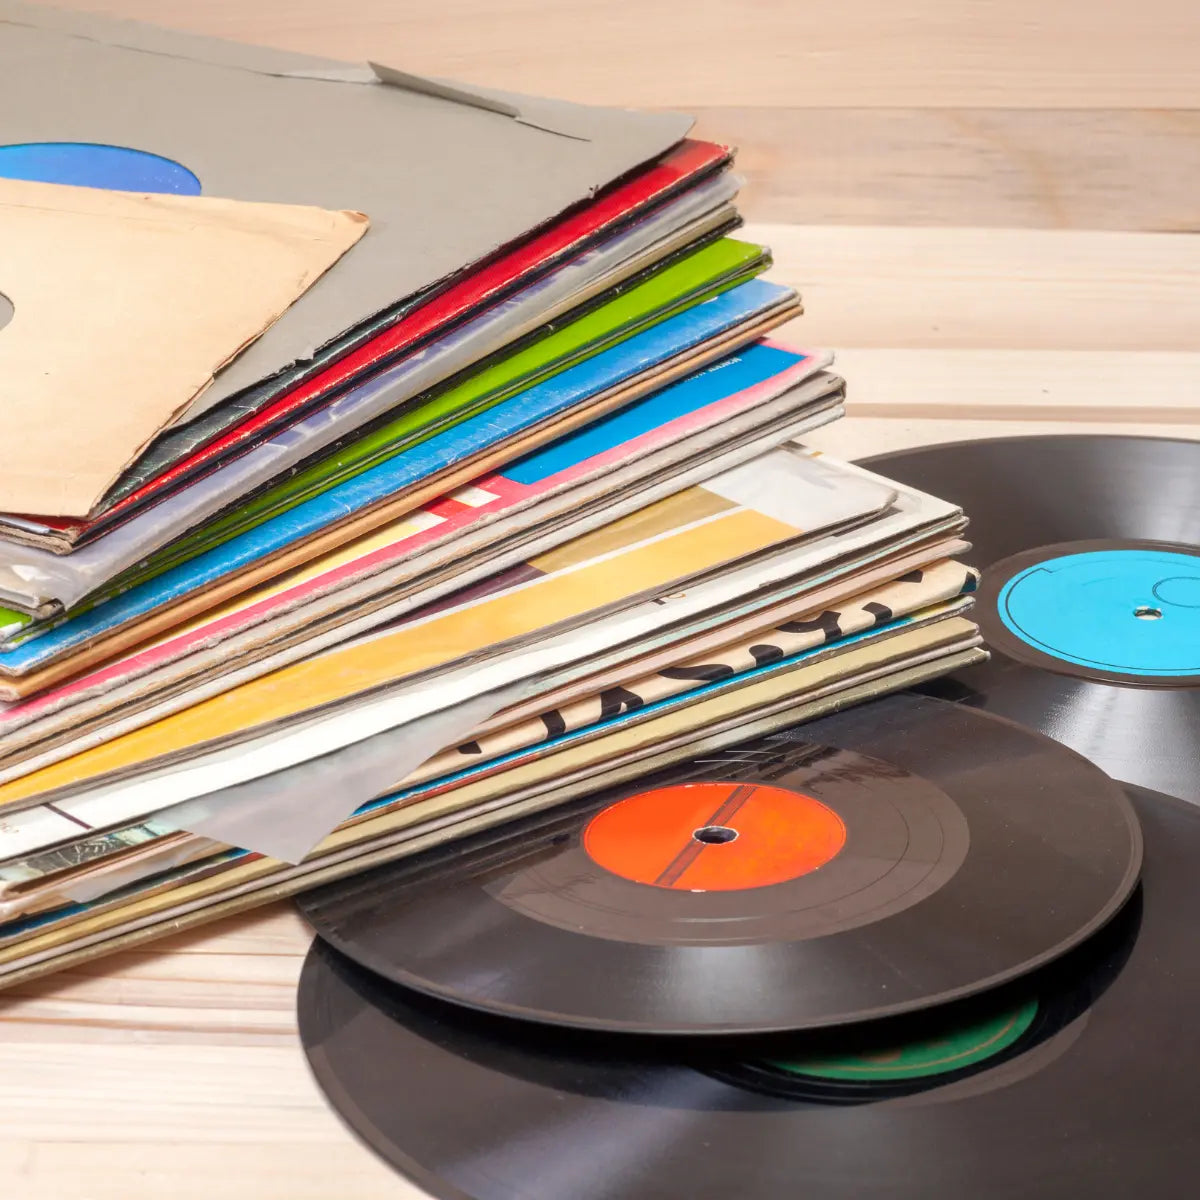 The Best Vinyl Records of the 1960s: Our Top Picks